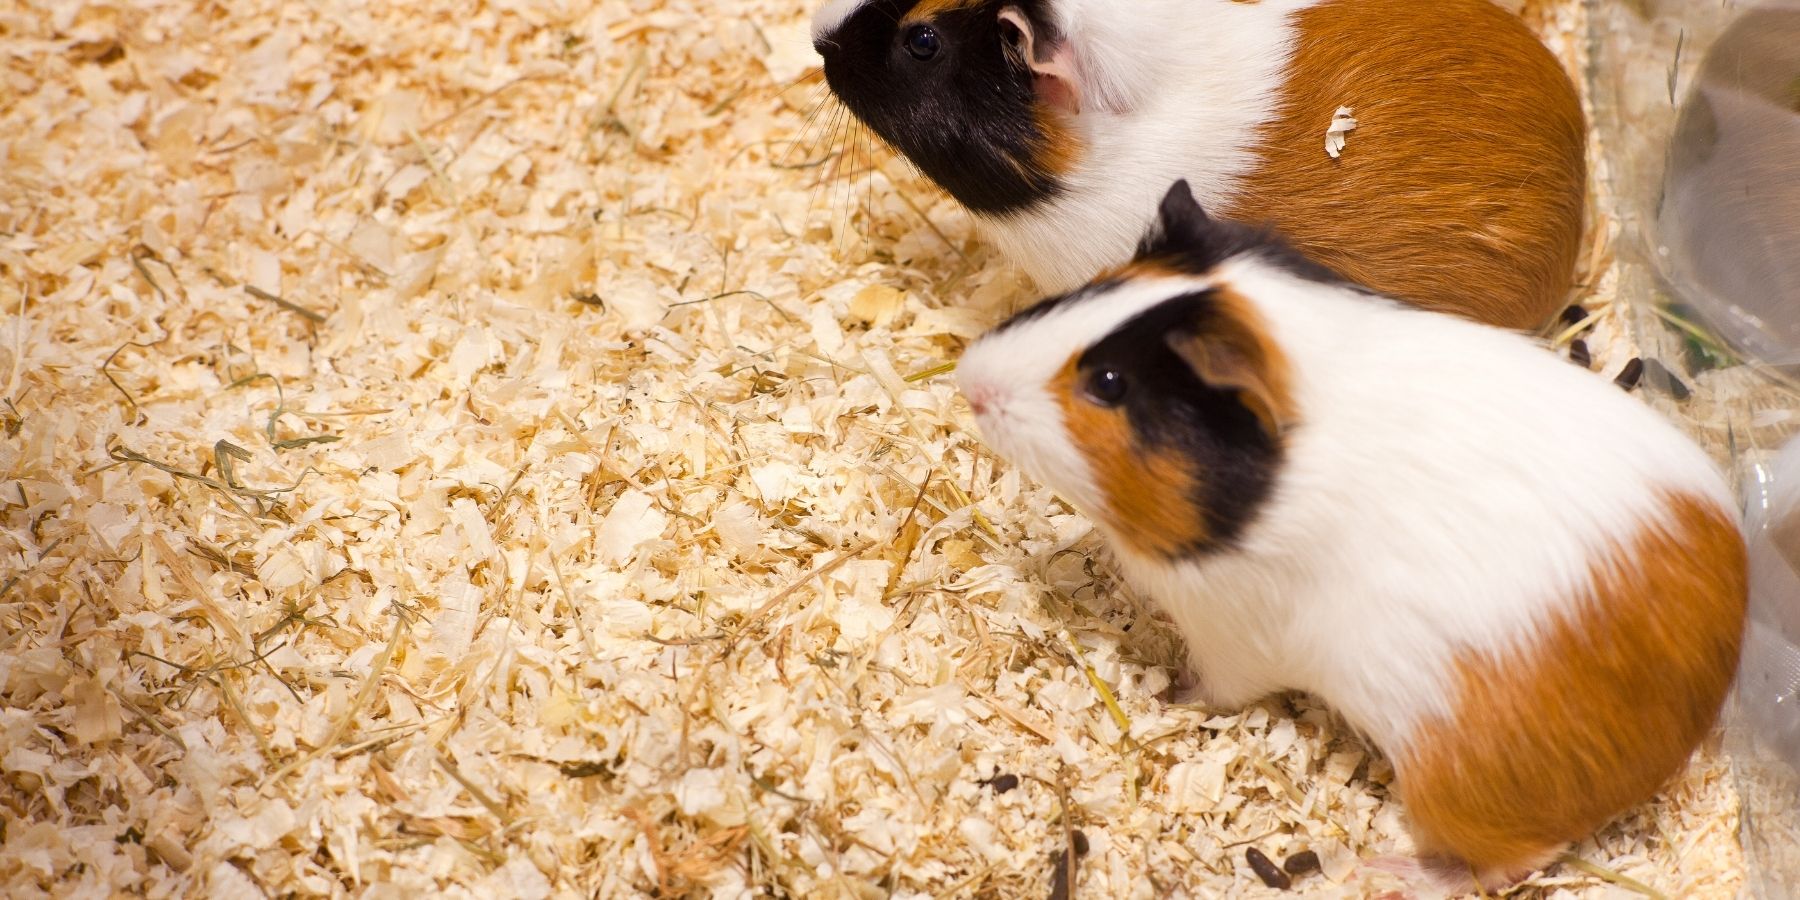 What Veggies Do Hamsters Love The Most?